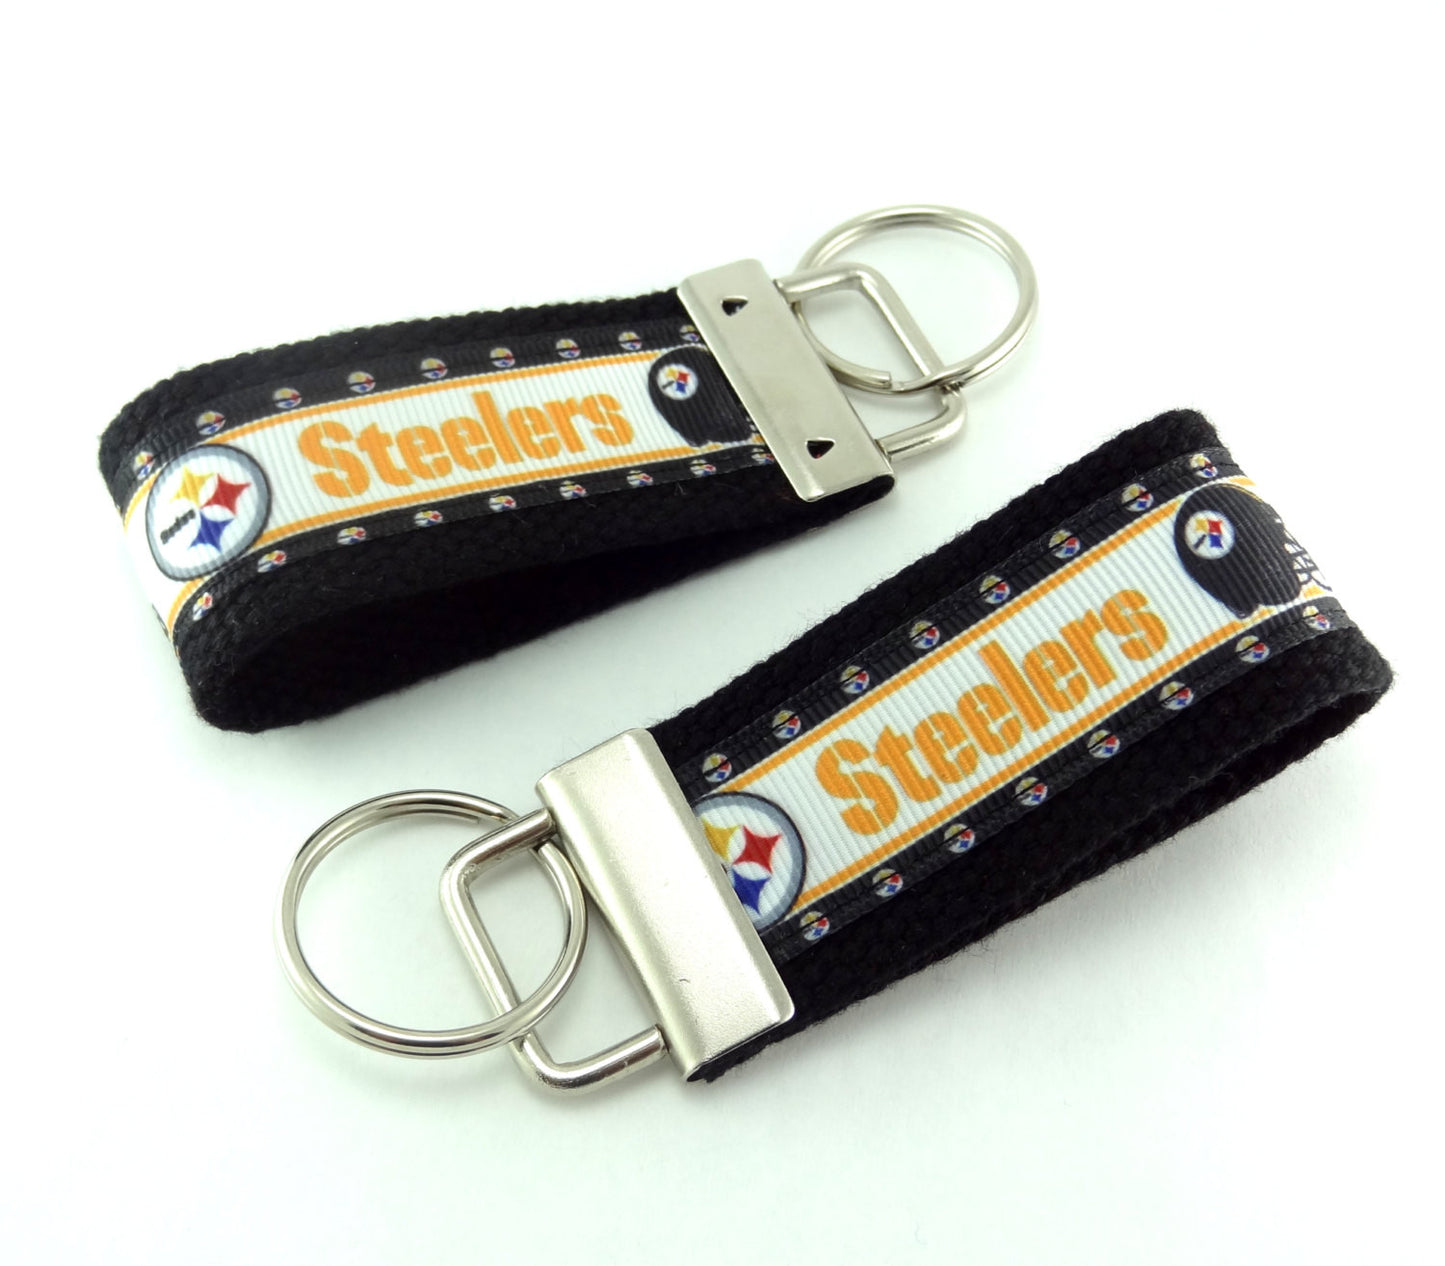 Key Fob (Small): Black and Yellow Gold Pittsburg Steelers Football Themed Key Fob Key Chain